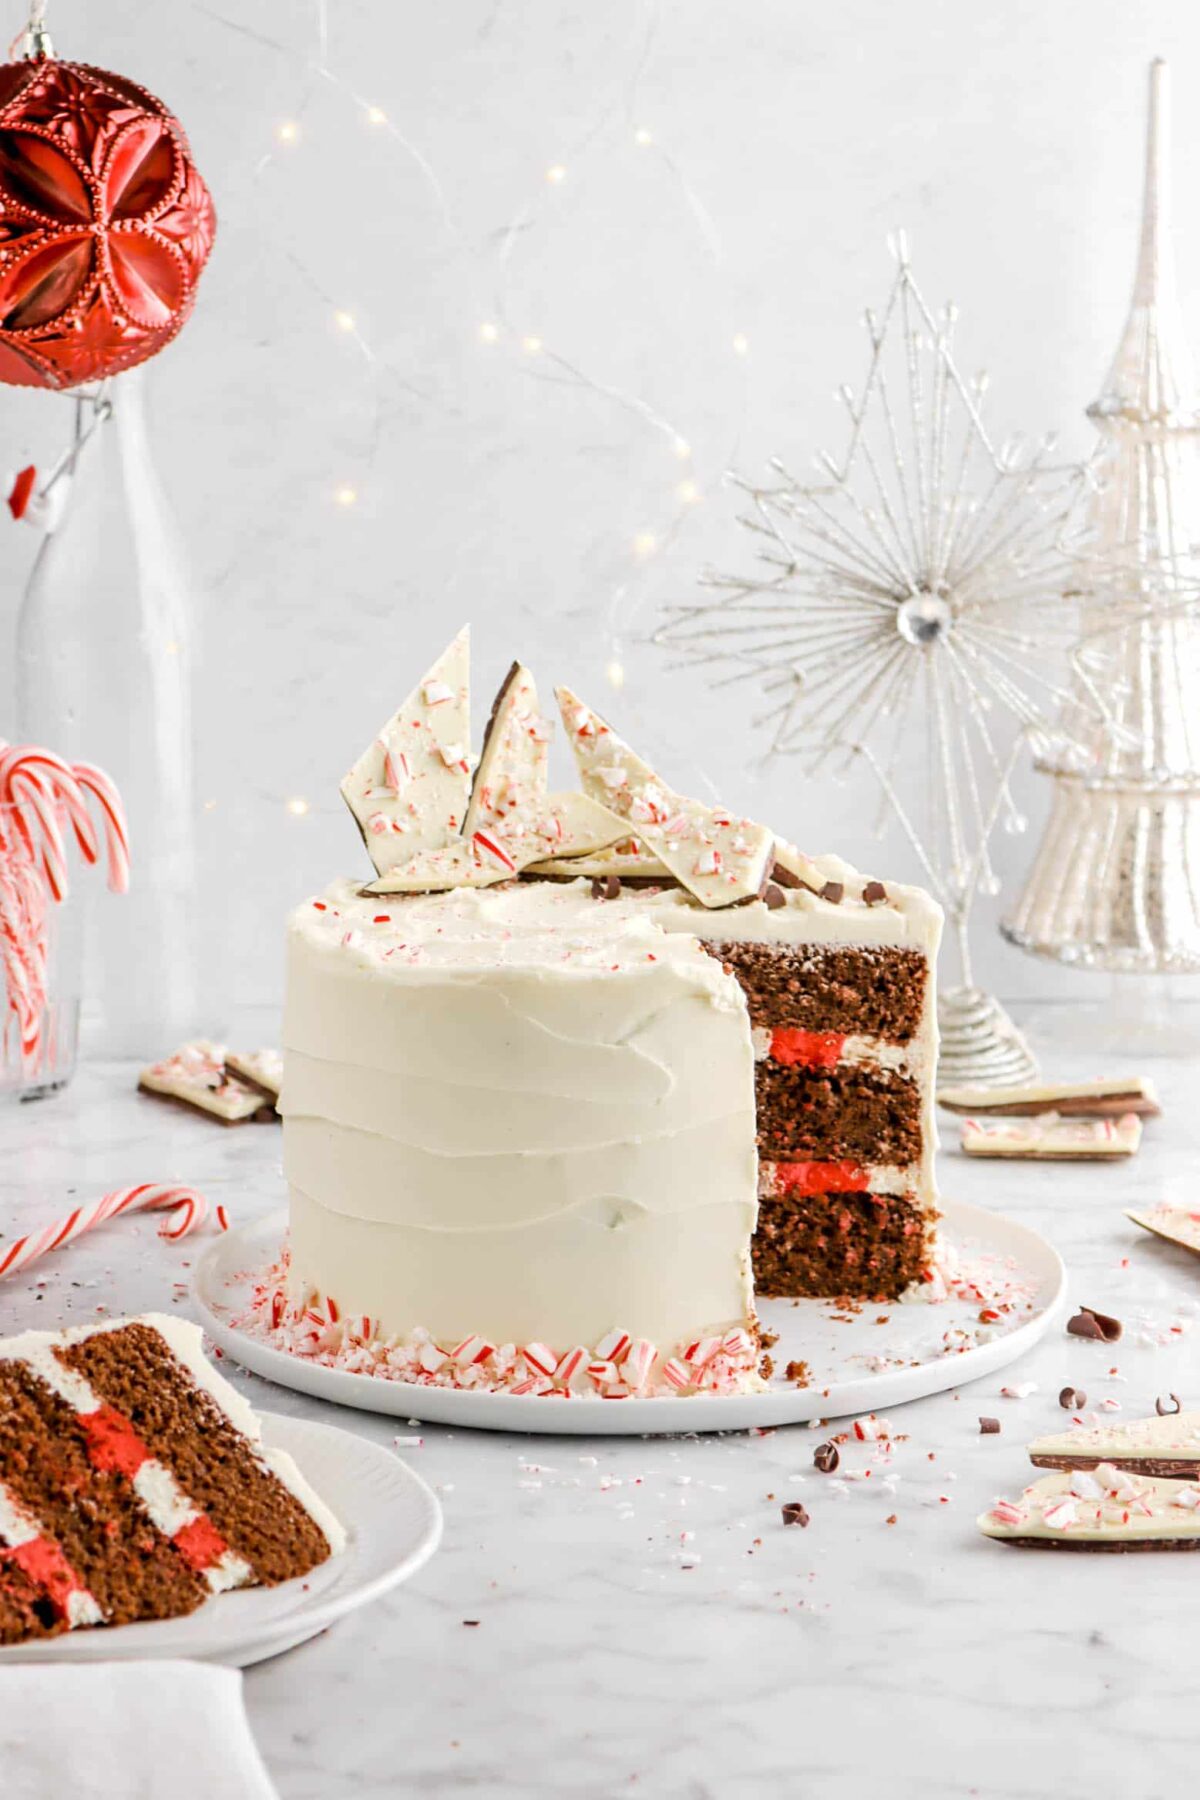 Dark Chocolate Peppermint Layer Cake with White Chocolate Peppermint Frosting